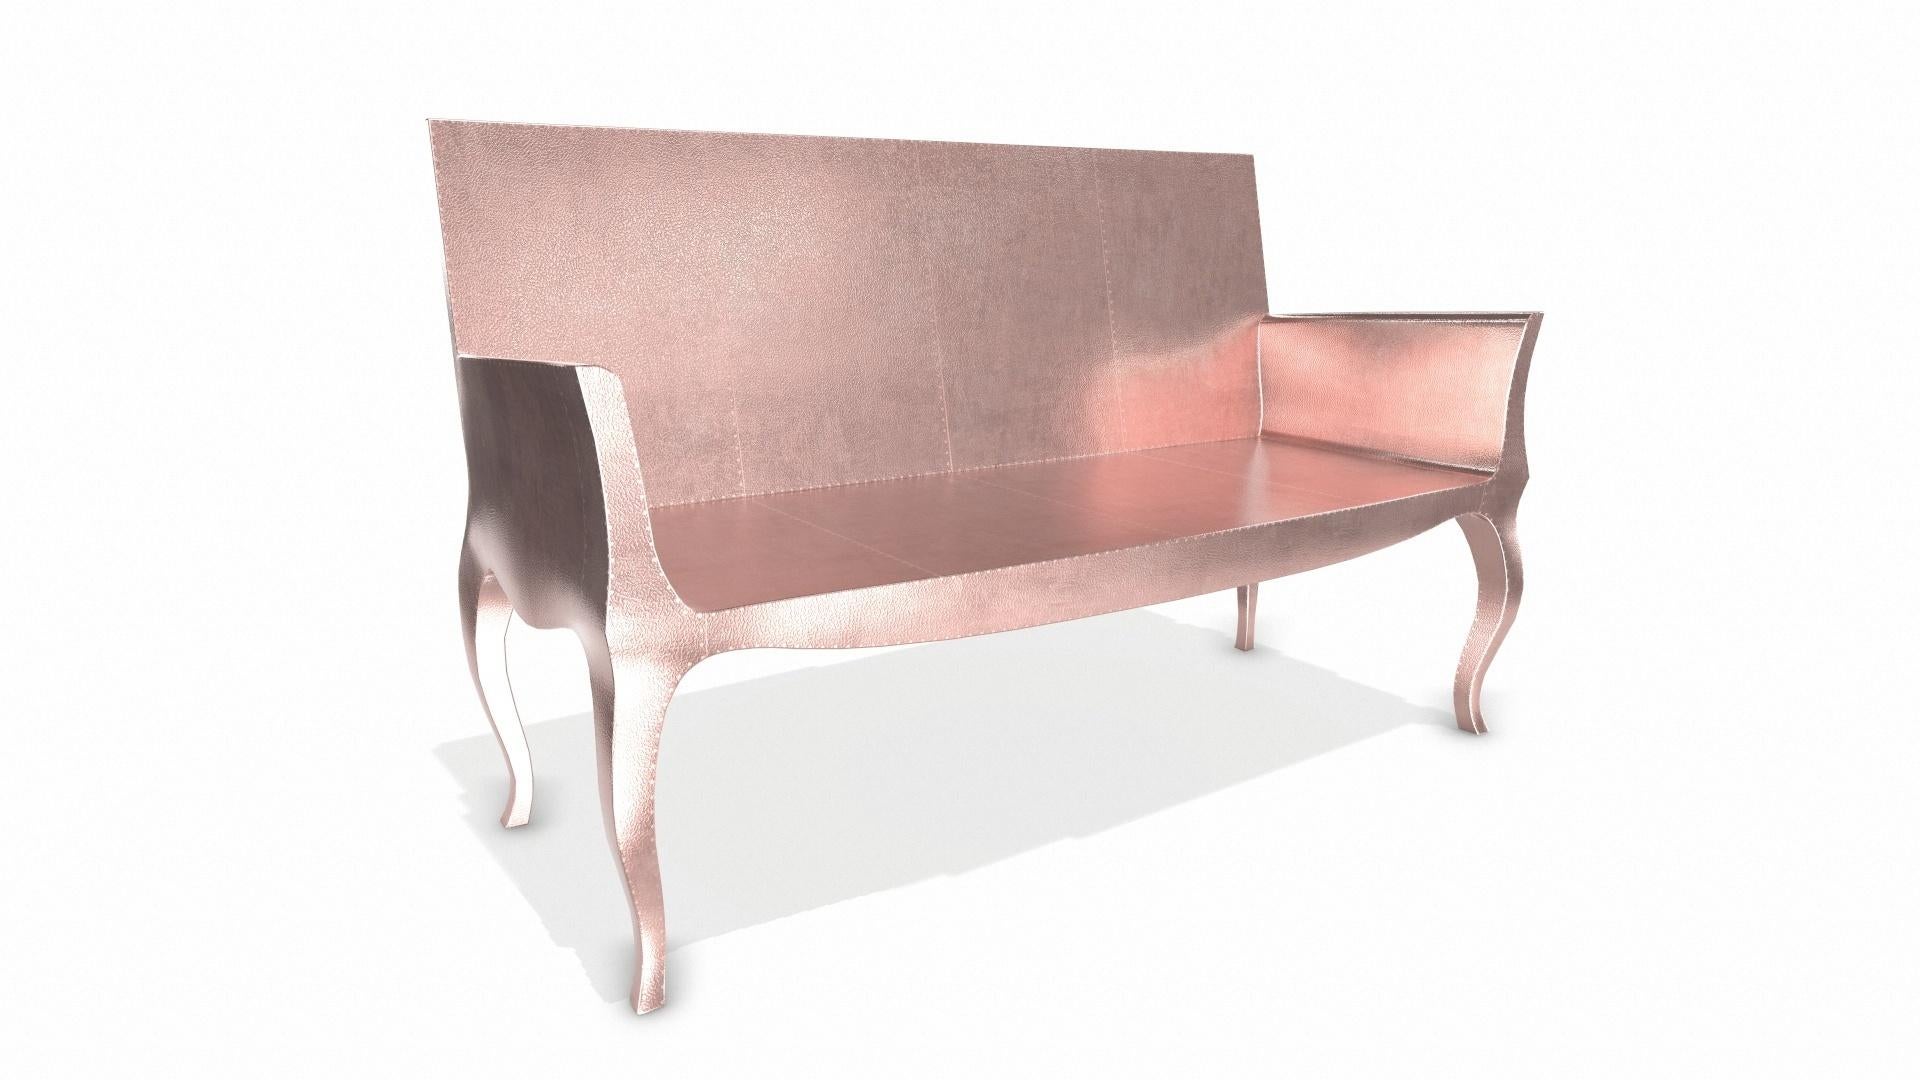 Contemporary Louise Settee Art Deco Chaise Longues in Fine Hammered Copper by Paul Mathieu For Sale